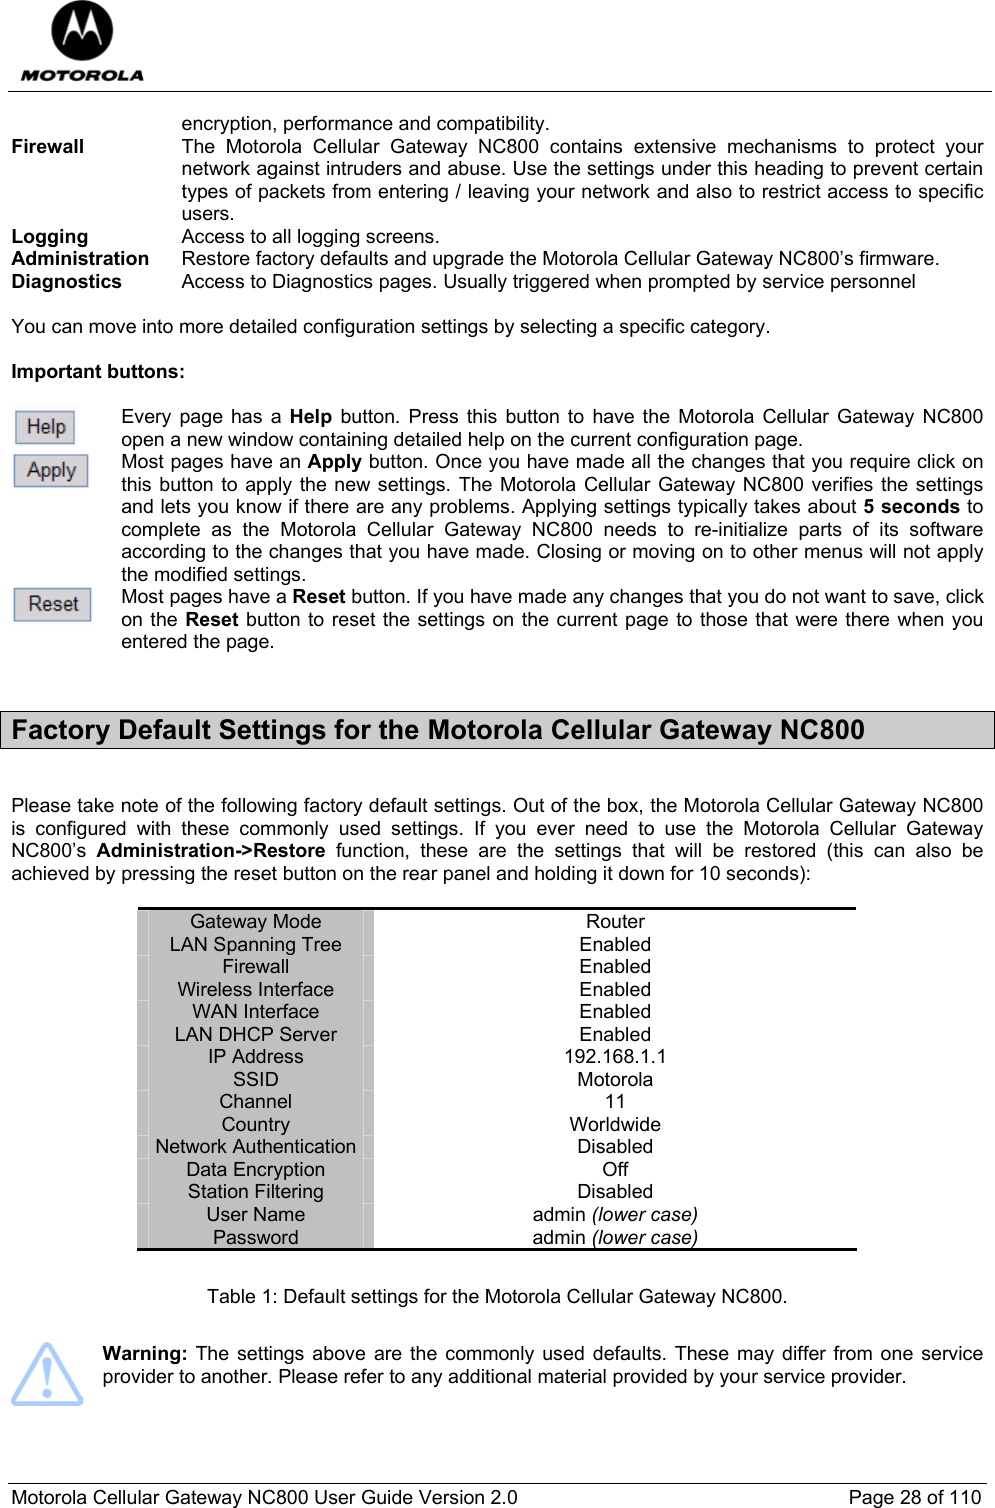  Motorola Cellular Gateway NC800 User Guide Version 2.0     Page 28 of 110  encryption, performance and compatibility. Firewall  The Motorola Cellular Gateway NC800 contains extensive mechanisms to protect your network against intruders and abuse. Use the settings under this heading to prevent certain types of packets from entering / leaving your network and also to restrict access to specific users. Logging  Access to all logging screens. Administration  Restore factory defaults and upgrade the Motorola Cellular Gateway NC800’s firmware.  Diagnostics  Access to Diagnostics pages. Usually triggered when prompted by service personnel  You can move into more detailed configuration settings by selecting a specific category.   Important buttons:   Every page has a Help button. Press this button to have the Motorola Cellular Gateway NC800 open a new window containing detailed help on the current configuration page.  Most pages have an Apply button. Once you have made all the changes that you require click on this button to apply the new settings. The Motorola Cellular Gateway NC800 verifies the settings and lets you know if there are any problems. Applying settings typically takes about 5 seconds to complete as the Motorola Cellular Gateway NC800 needs to re-initialize parts of its software according to the changes that you have made. Closing or moving on to other menus will not apply the modified settings.  Most pages have a Reset button. If you have made any changes that you do not want to save, click on the Reset button to reset the settings on the current page to those that were there when you entered the page.   Factory Default Settings for the Motorola Cellular Gateway NC800  Please take note of the following factory default settings. Out of the box, the Motorola Cellular Gateway NC800 is configured with these commonly used settings. If you ever need to use the Motorola Cellular Gateway NC800’s  Administration-&gt;Restore function, these are the settings that will be restored (this can also be achieved by pressing the reset button on the rear panel and holding it down for 10 seconds):  Gateway Mode  Router LAN Spanning Tree  Enabled Firewall Enabled Wireless Interface  Enabled WAN Interface  Enabled LAN DHCP Server  Enabled IP Address  192.168.1.1 SSID Motorola Channel 11 Country Worldwide Network Authentication  Disabled  Data Encryption  Off Station Filtering   Disabled User Name  admin (lower case) Password admin (lower case)  Table 1: Default settings for the Motorola Cellular Gateway NC800.   Warning: The settings above are the commonly used defaults. These may differ from one service provider to another. Please refer to any additional material provided by your service provider.   